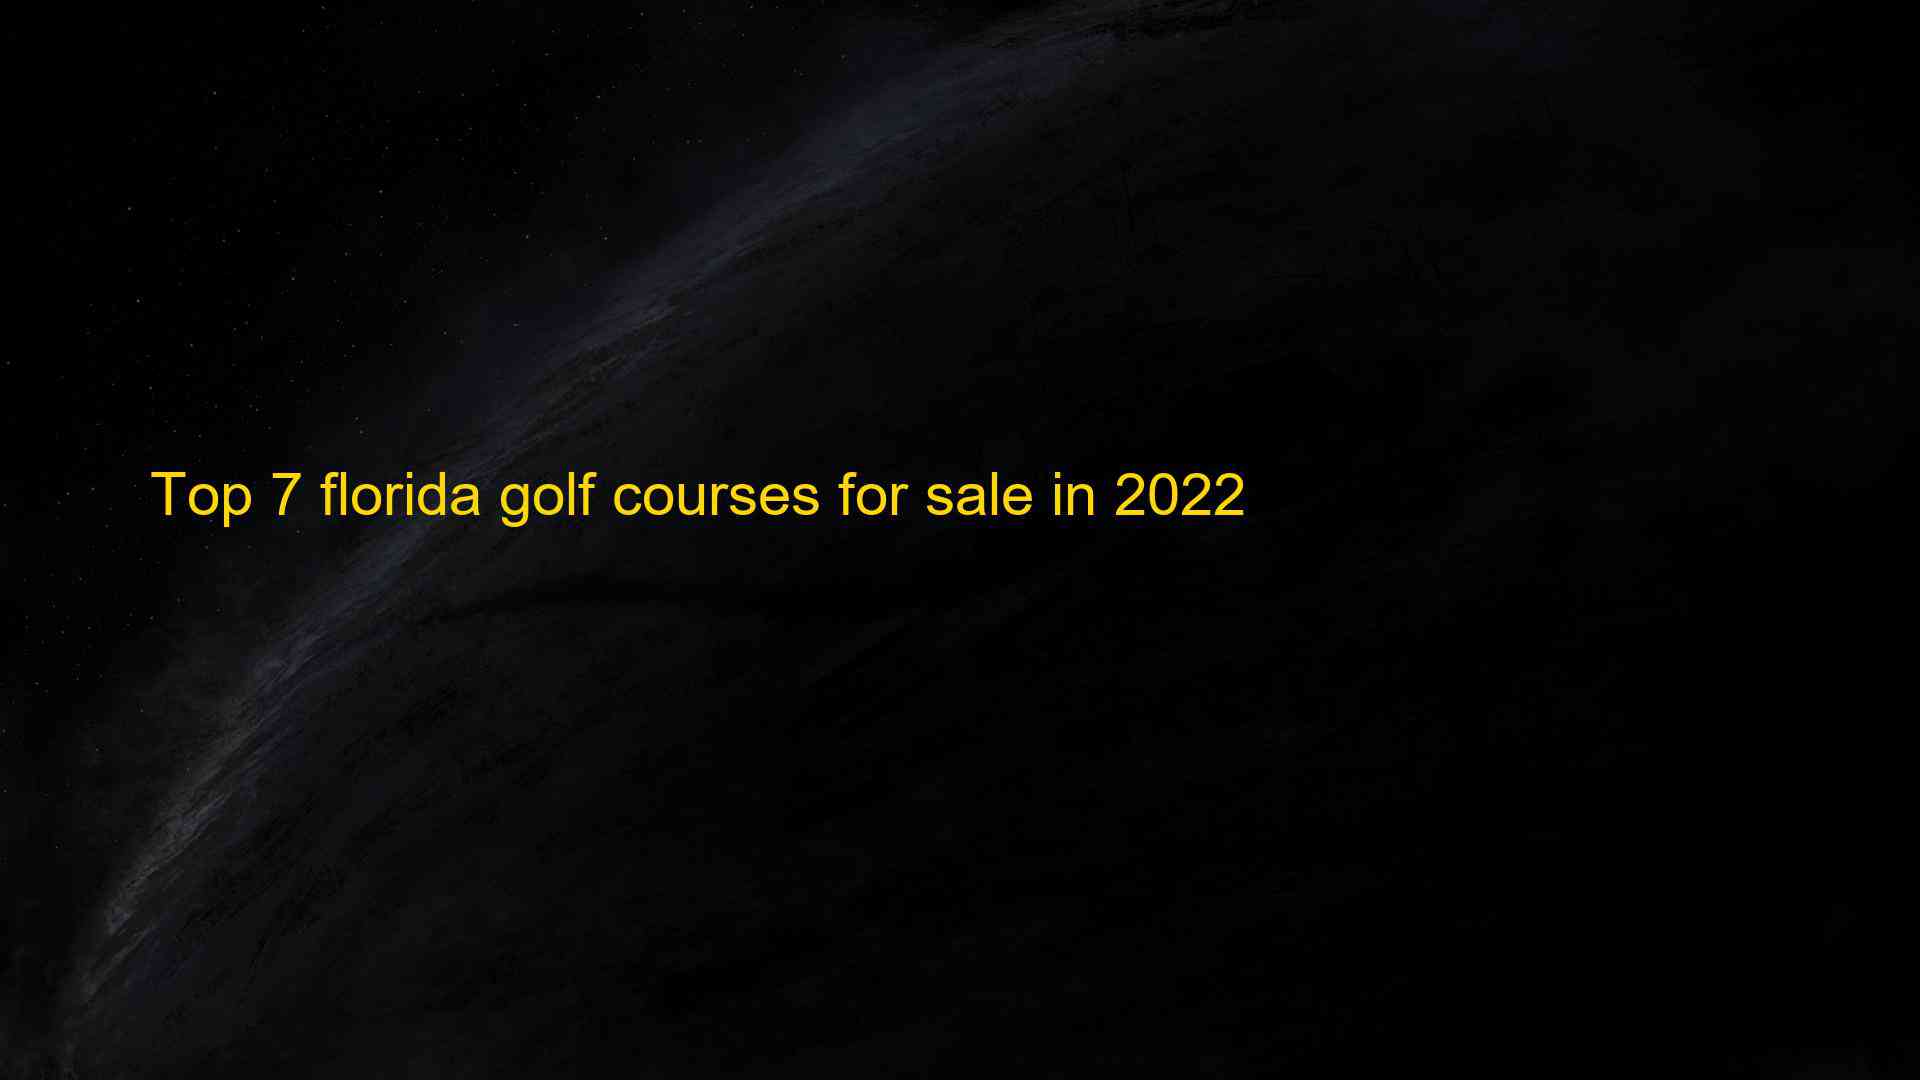 Top 7 florida golf courses for sale in 2022 1661900705